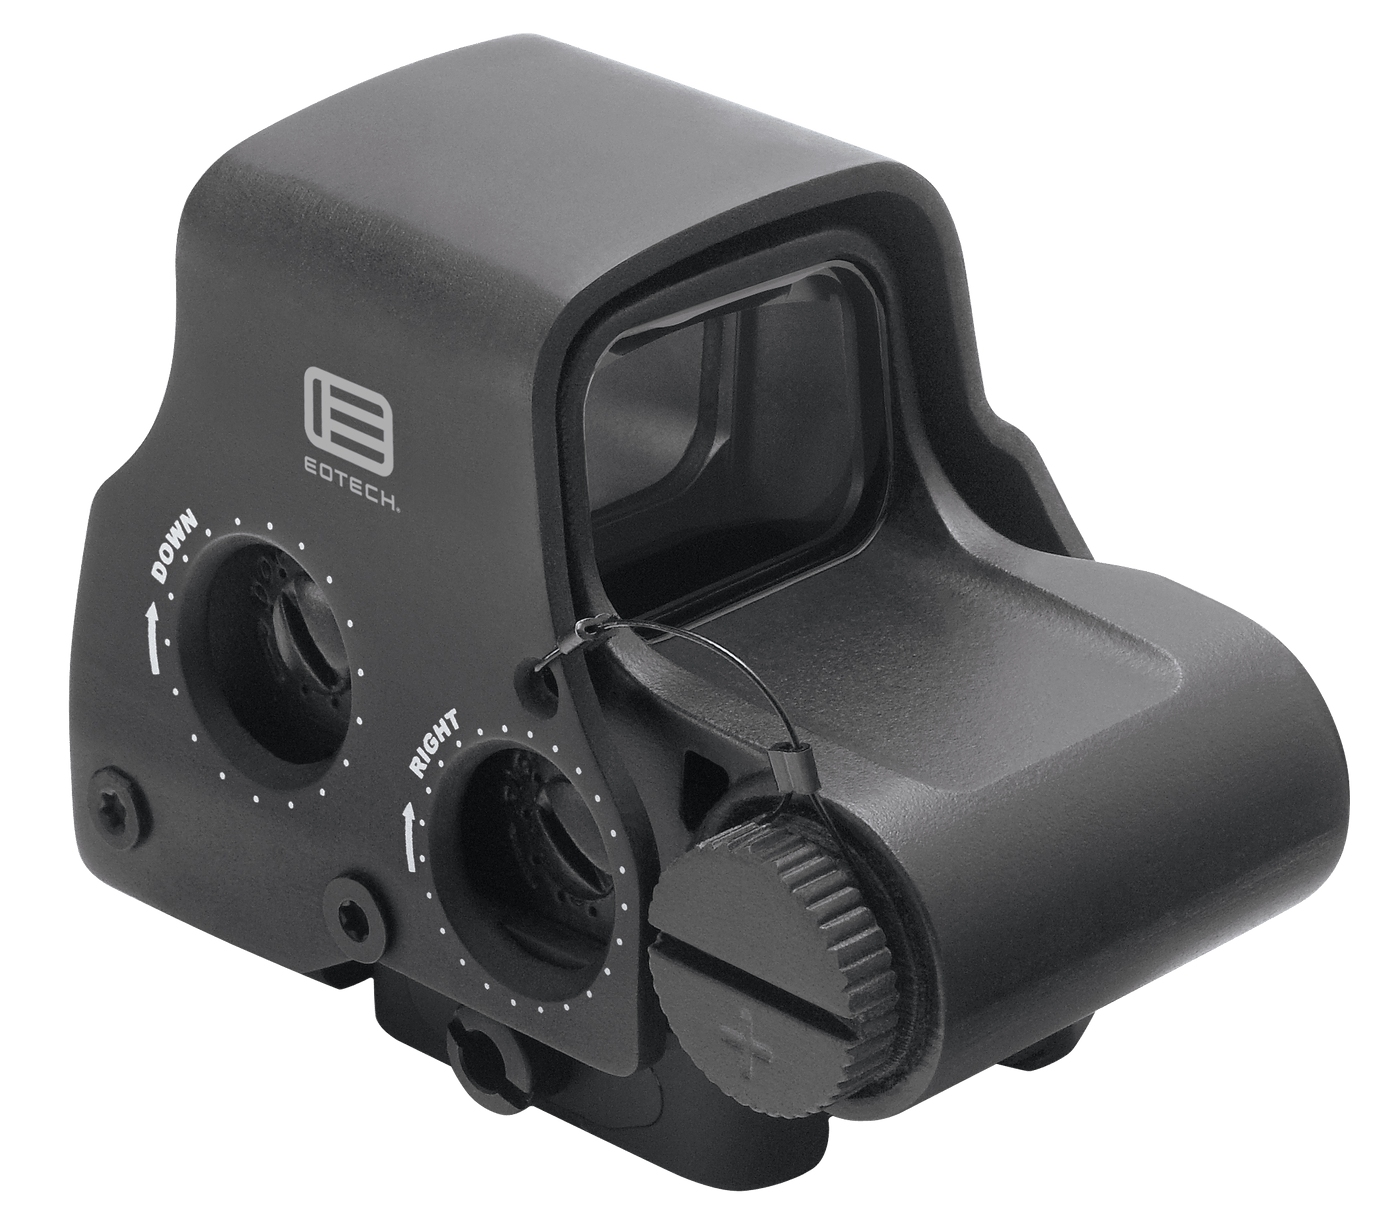 Eotech Eotech Exps3-0 Holographic Red Dot Sight Black 68moa Ring With 1moa Dot Cr123 Battery Optics and Accessories